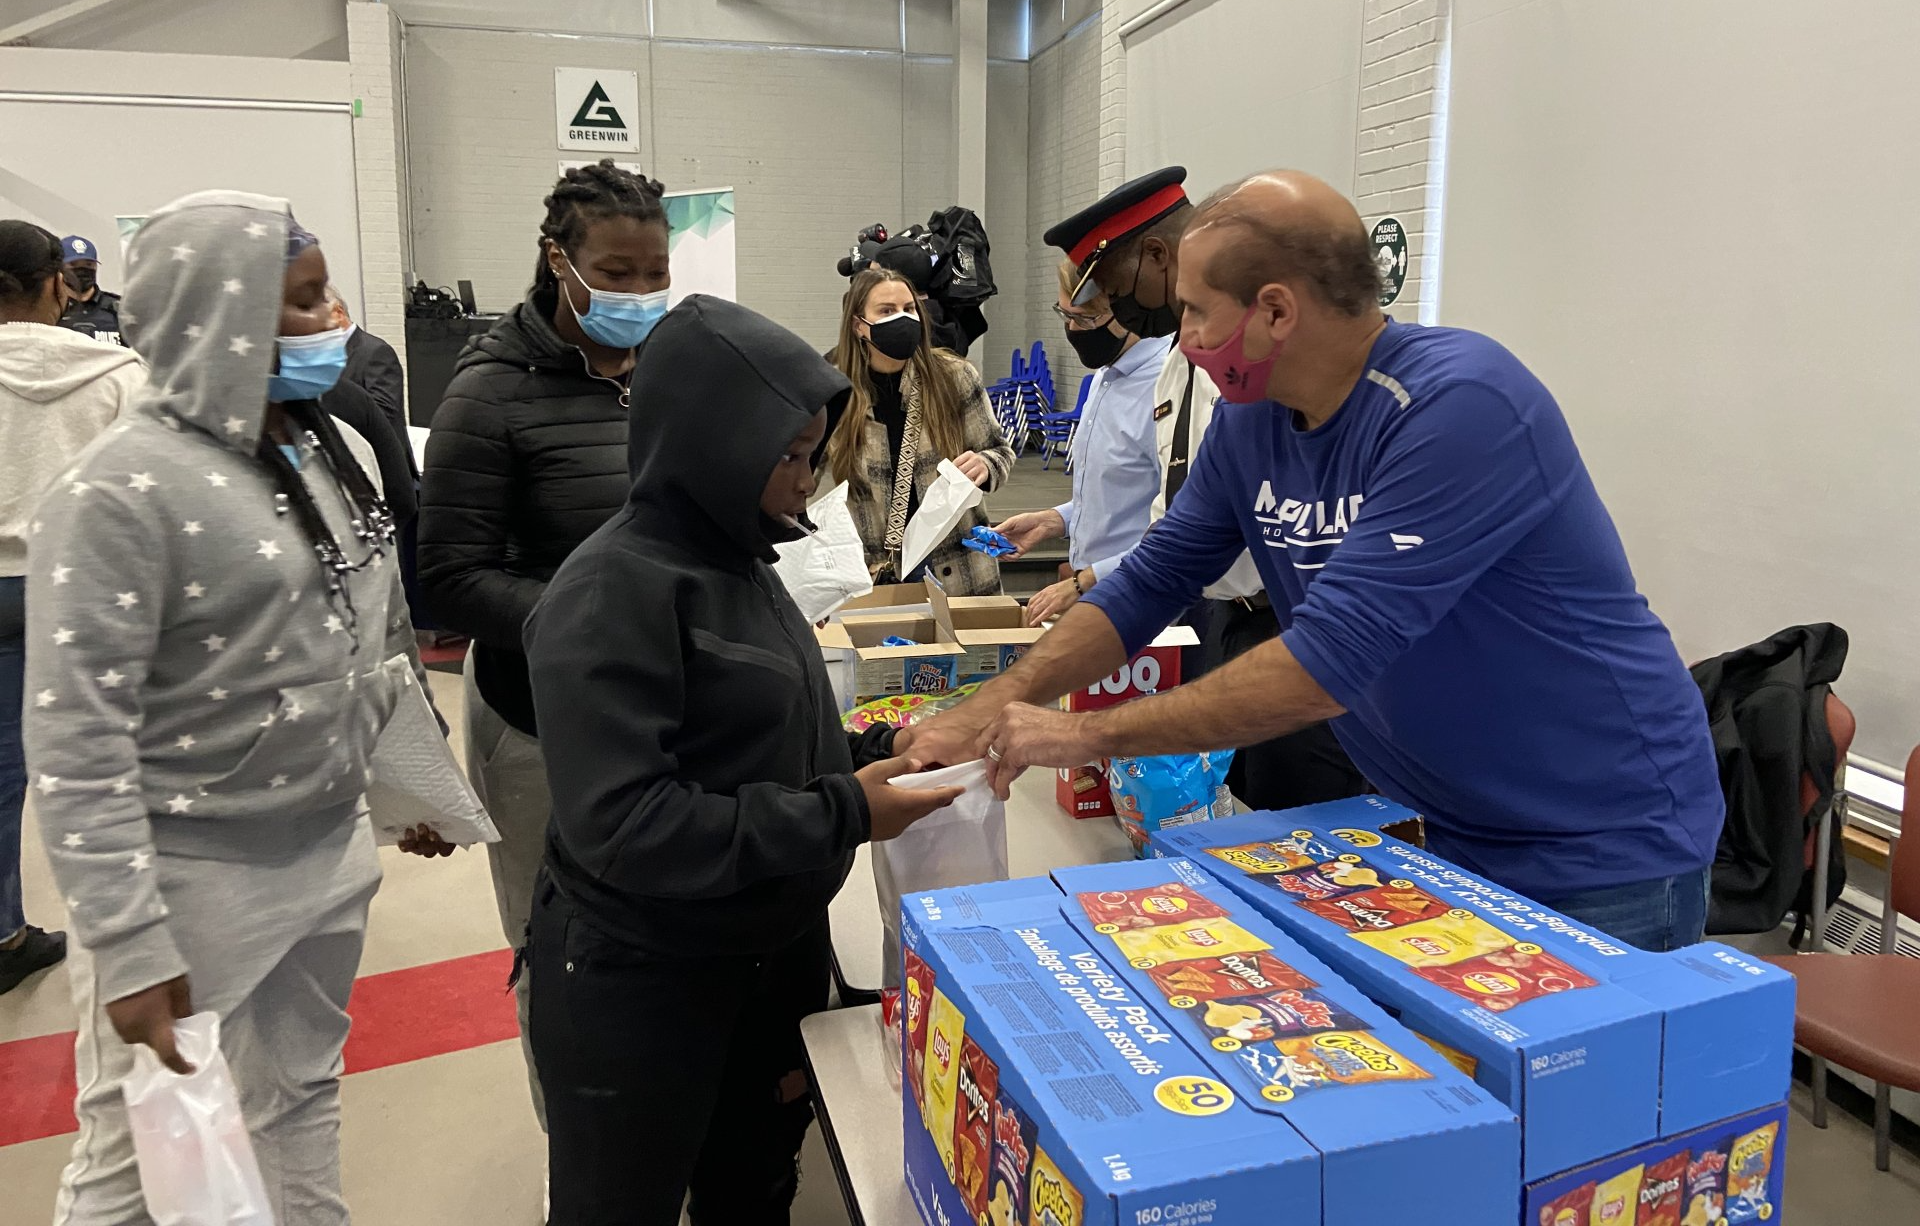 Kevin Green handing out treats to students